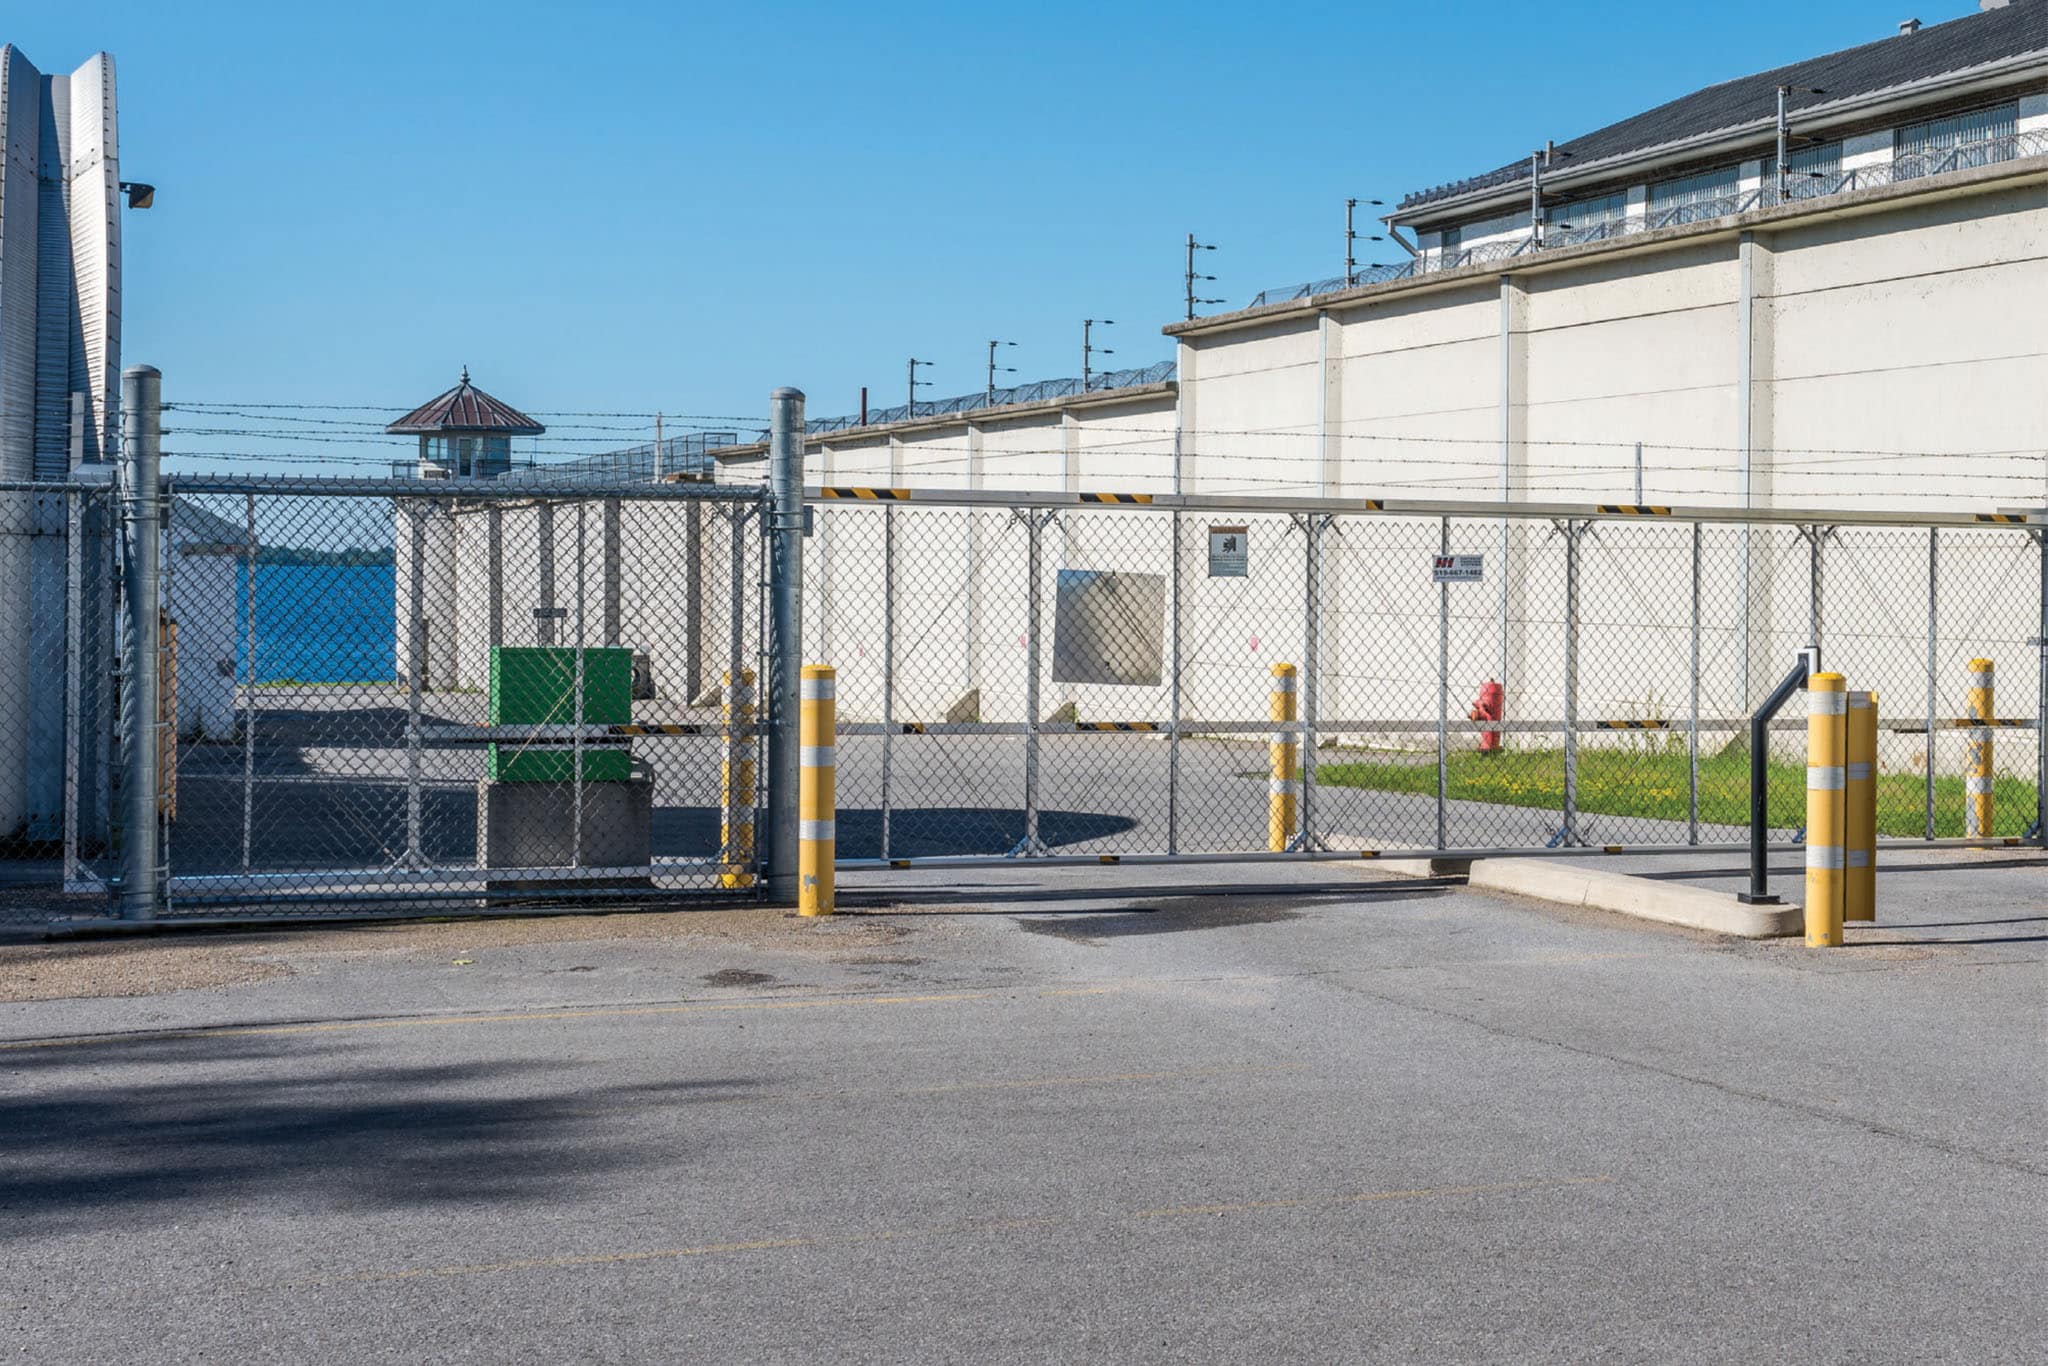 Redesigning an ASD System to Improve Critical Prison-safety Outcomes at Acacia Prison